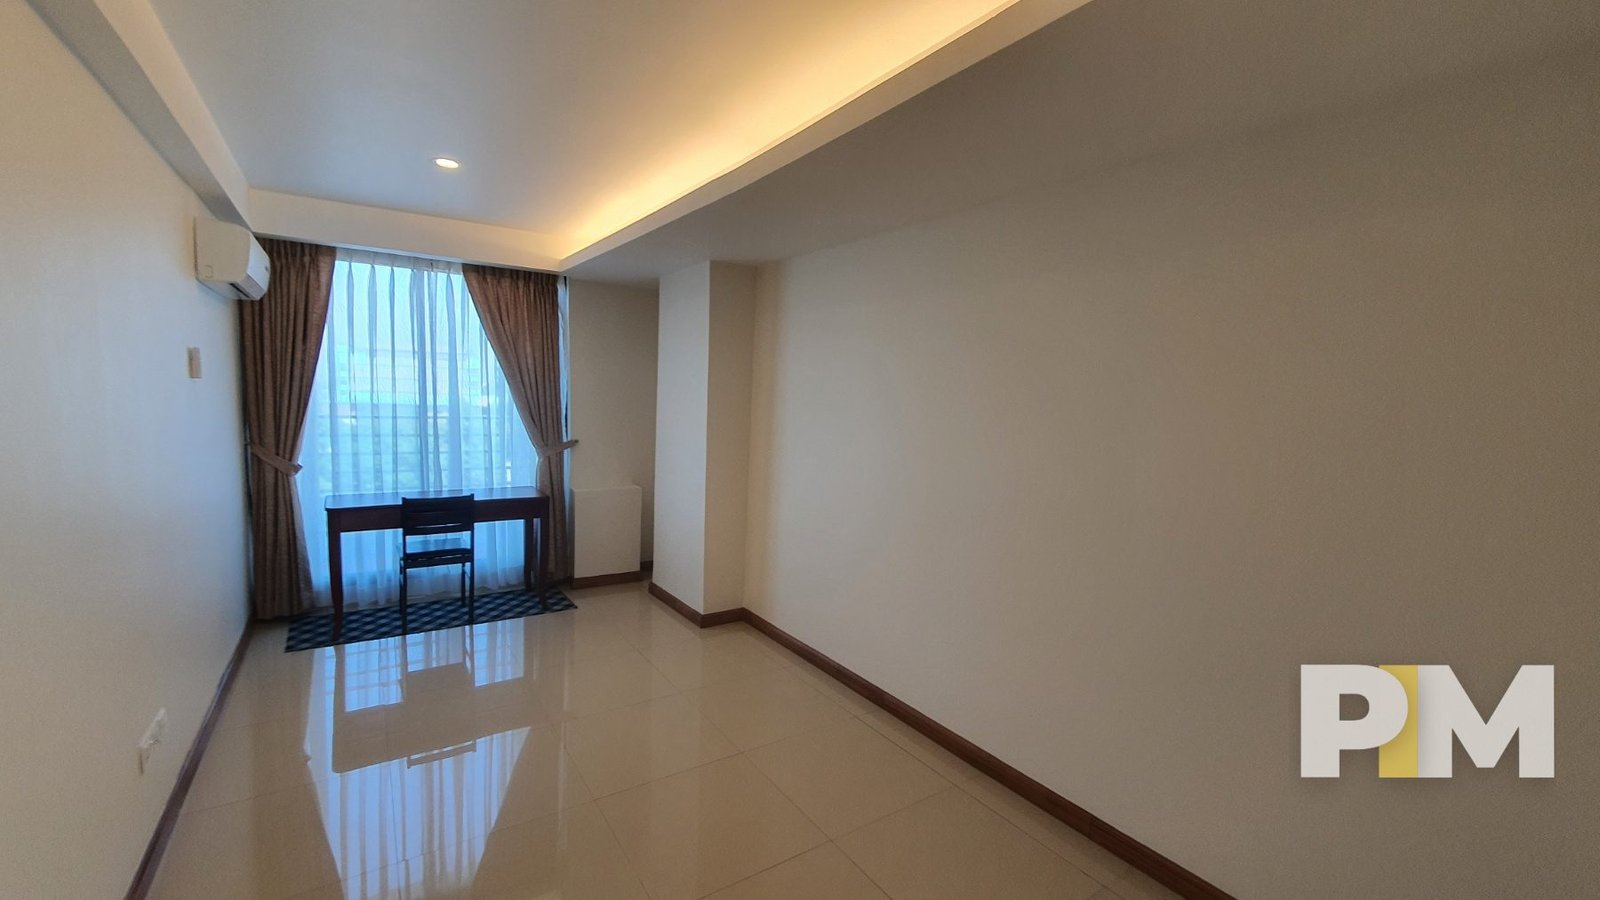 Office space in apartment for rent in Yangon